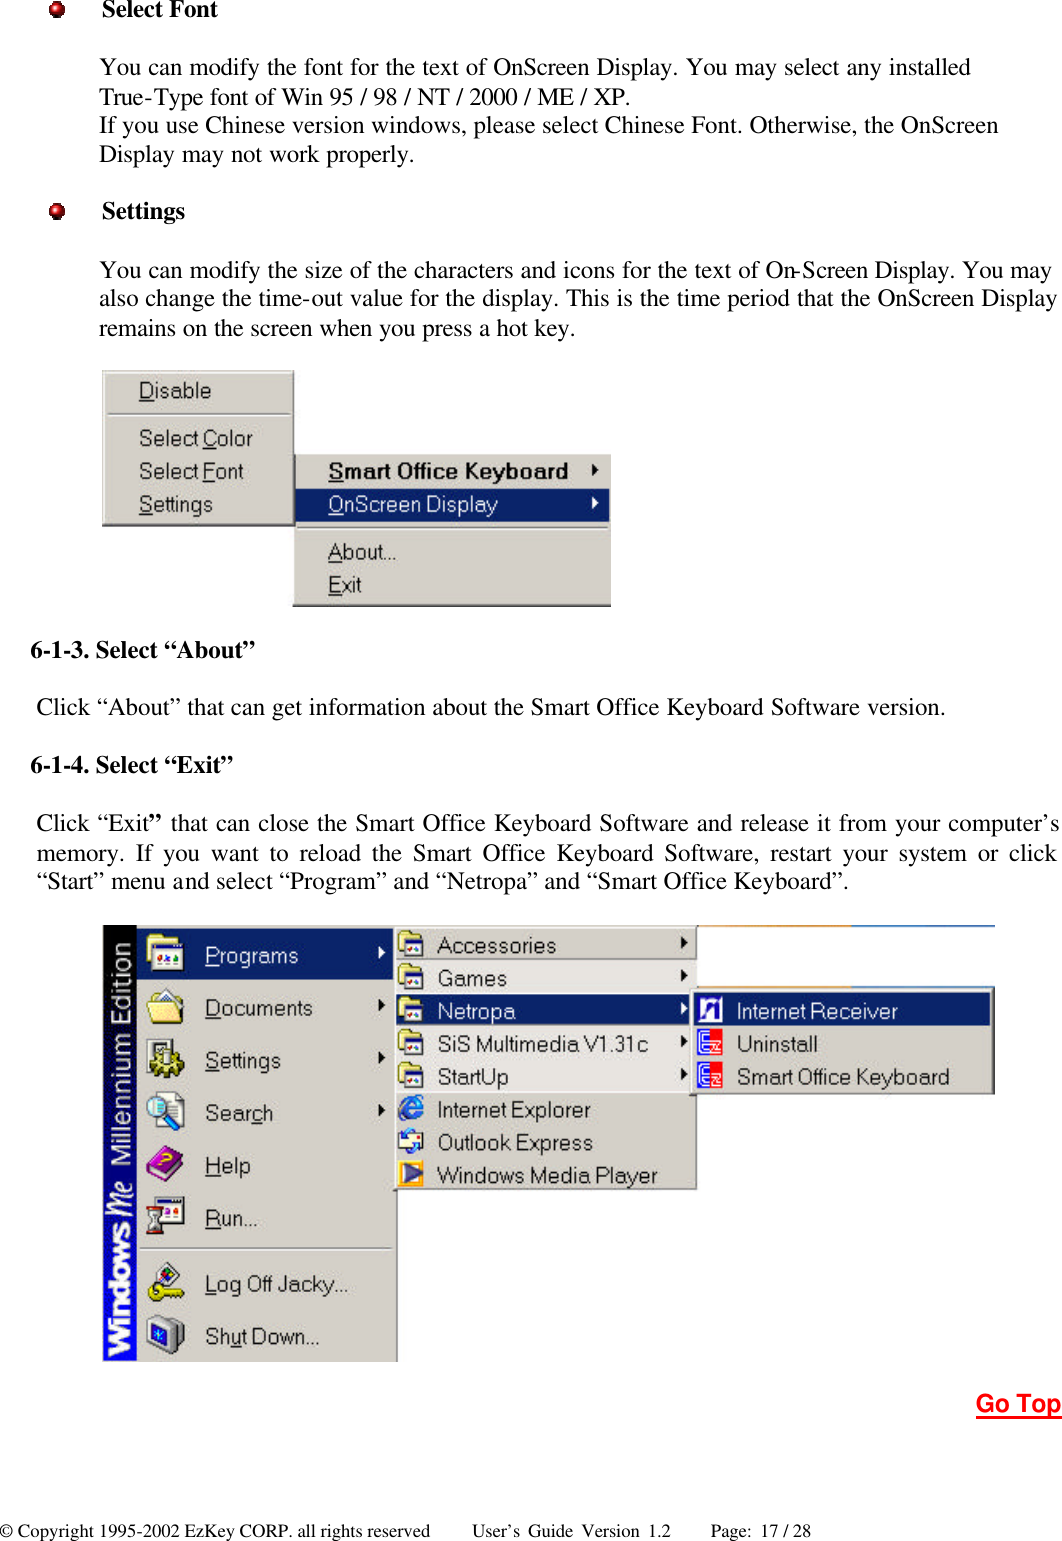 © Copyright 1995-2002 EzKey CORP. all rights reserved     User’s Guide Version 1.2     Page: 17 / 28  Select Font You can modify the font for the text of OnScreen Display. You may select any installed True-Type font of Win 95 / 98 / NT / 2000 / ME / XP. If you use Chinese version windows, please select Chinese Font. Otherwise, the OnScreen Display may not work properly.  Settings You can modify the size of the characters and icons for the text of On-Screen Display. You may also change the time-out value for the display. This is the time period that the OnScreen Display remains on the screen when you press a hot key.    6-1-3. Select “About” Click “About” that can get information about the Smart Office Keyboard Software version. 6-1-4. Select “Exit” Click “Exit” that can close the Smart Office Keyboard Software and release it from your computer’s memory. If you want to reload the Smart Office Keyboard Software, restart your system or click “Start” menu and select “Program” and “Netropa” and “Smart Office Keyboard”.      Go Top 